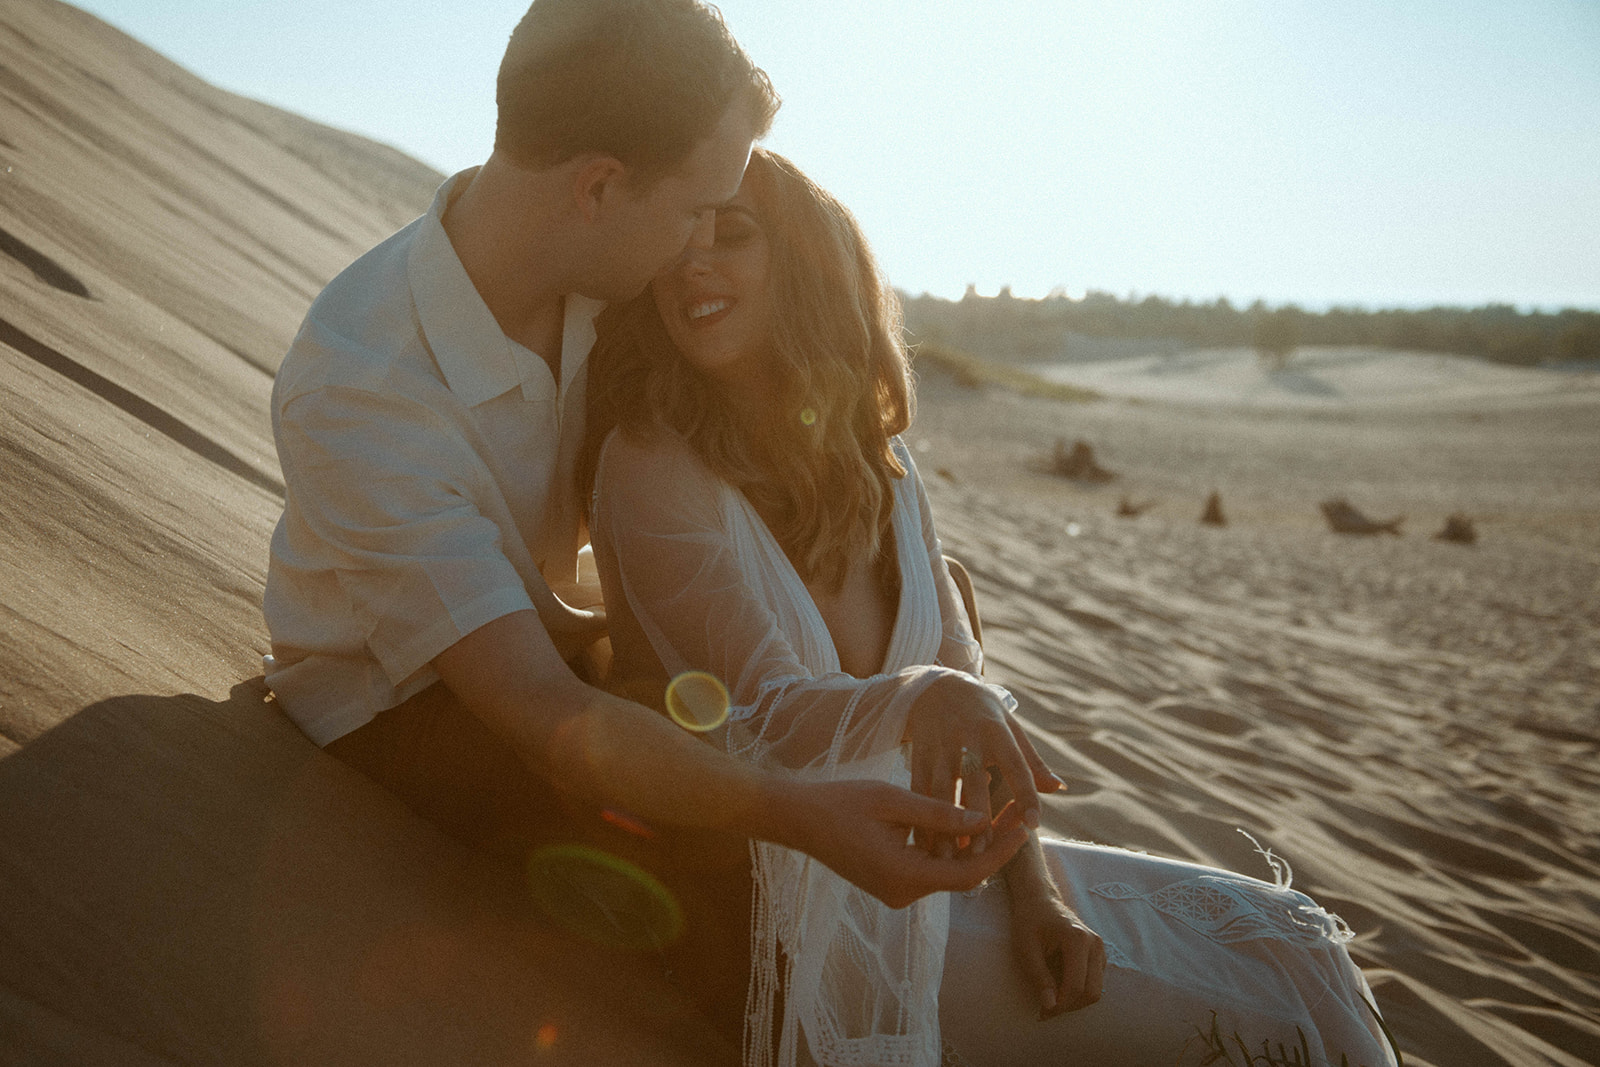 A couple who did bridal photos at the sand dunes share an intimate moment together.